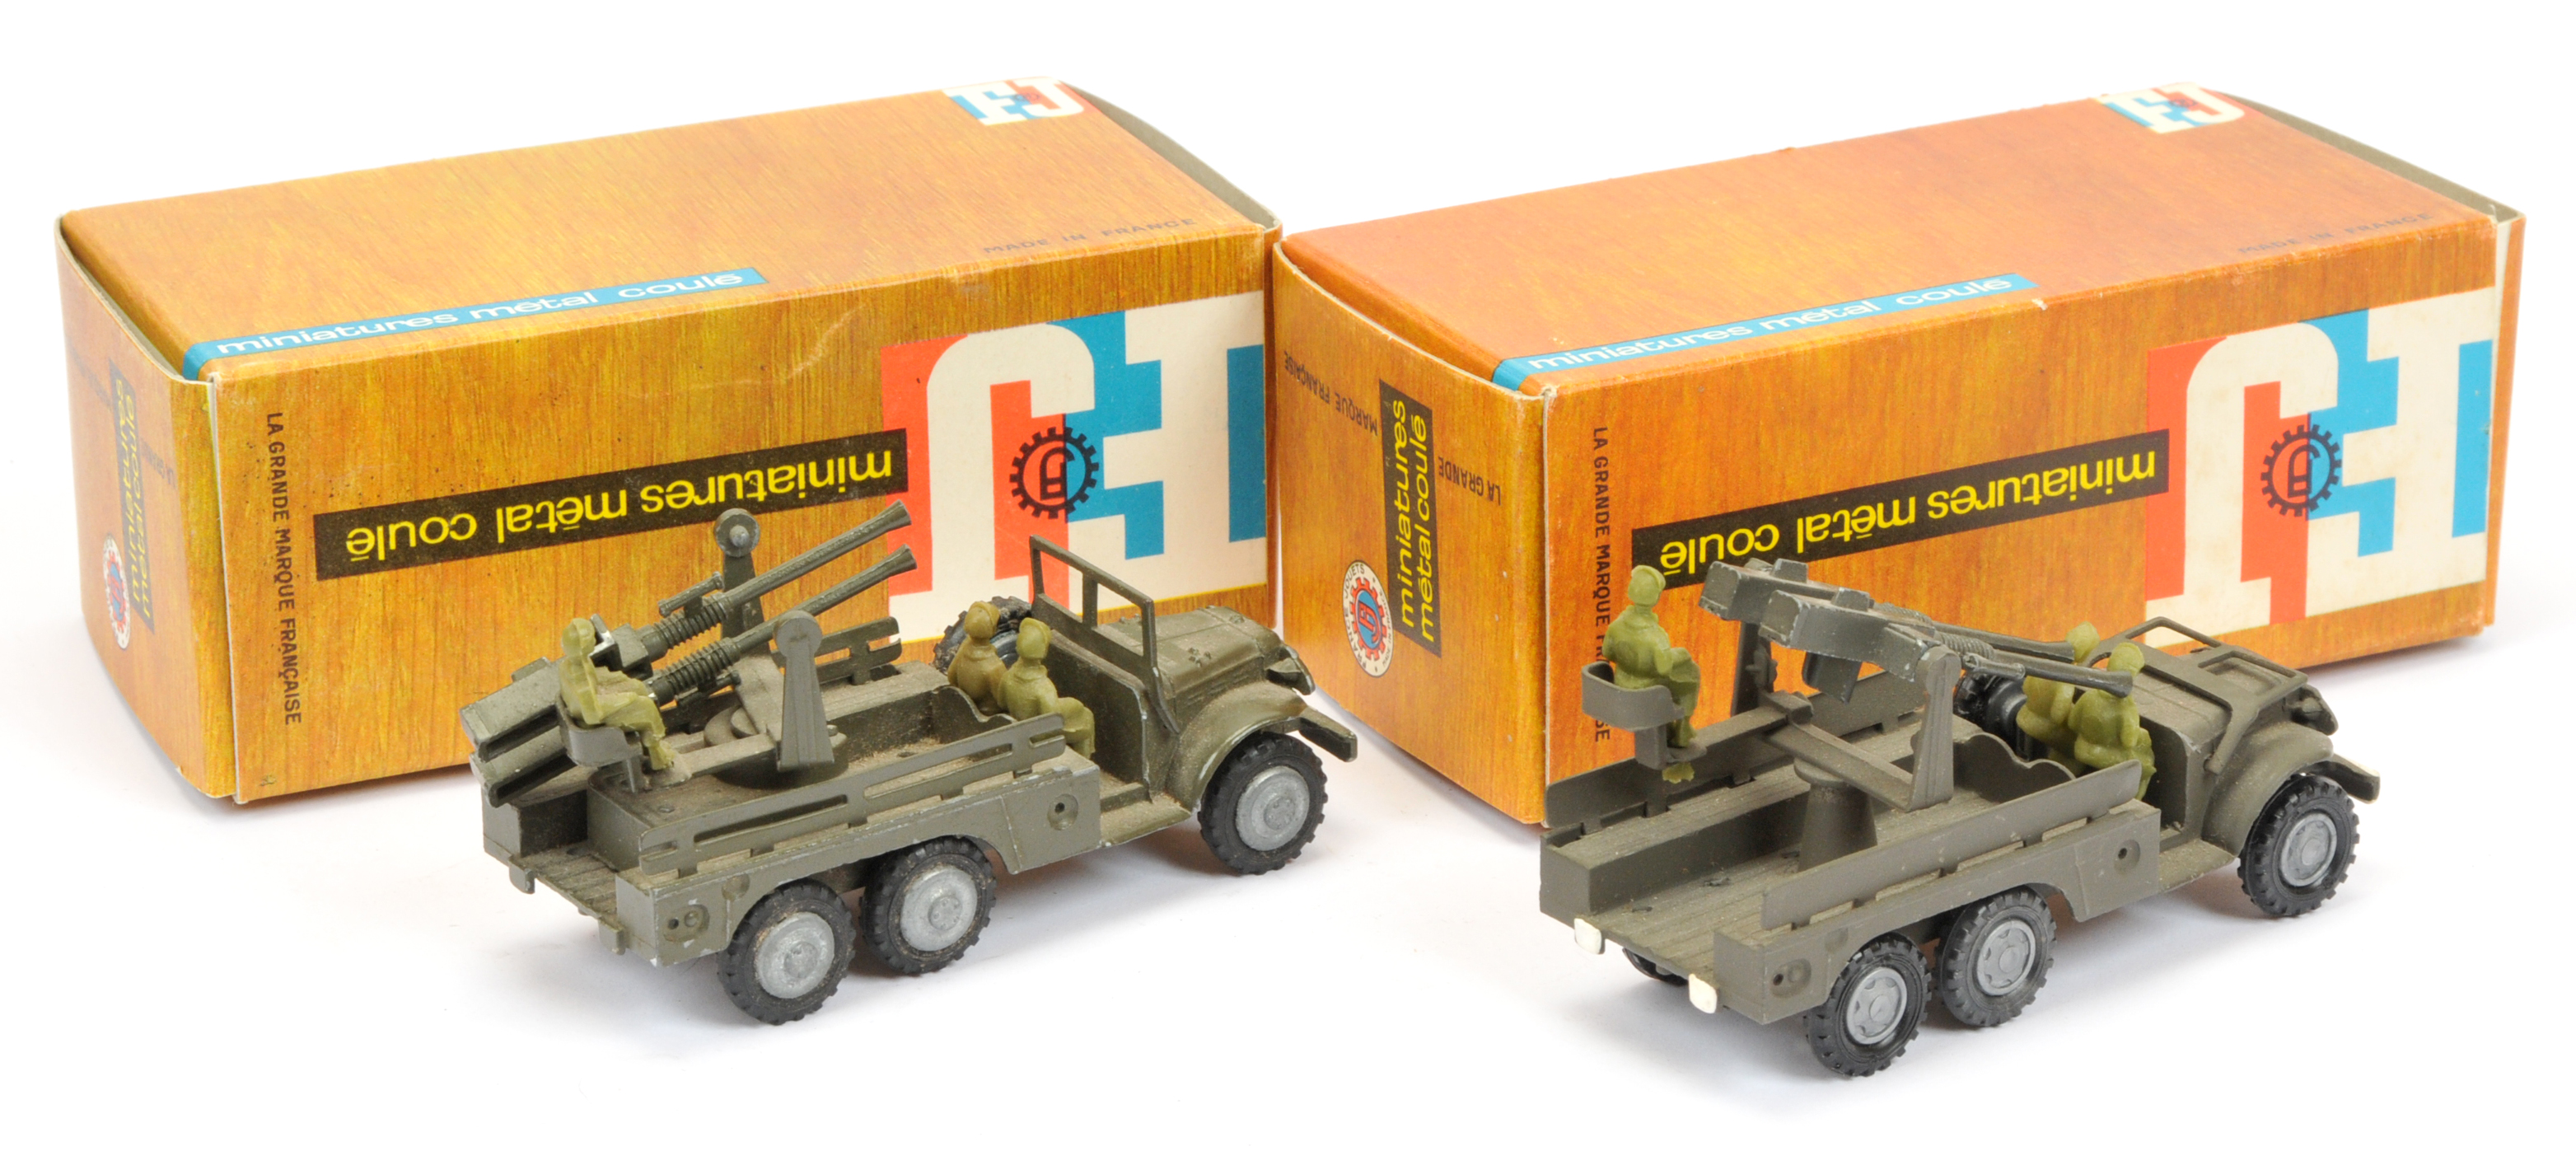 FJ Military a pair  - (1) with Anti-aircraft gun lorry - Drab green with silver hubs and (2) same... - Image 2 of 2